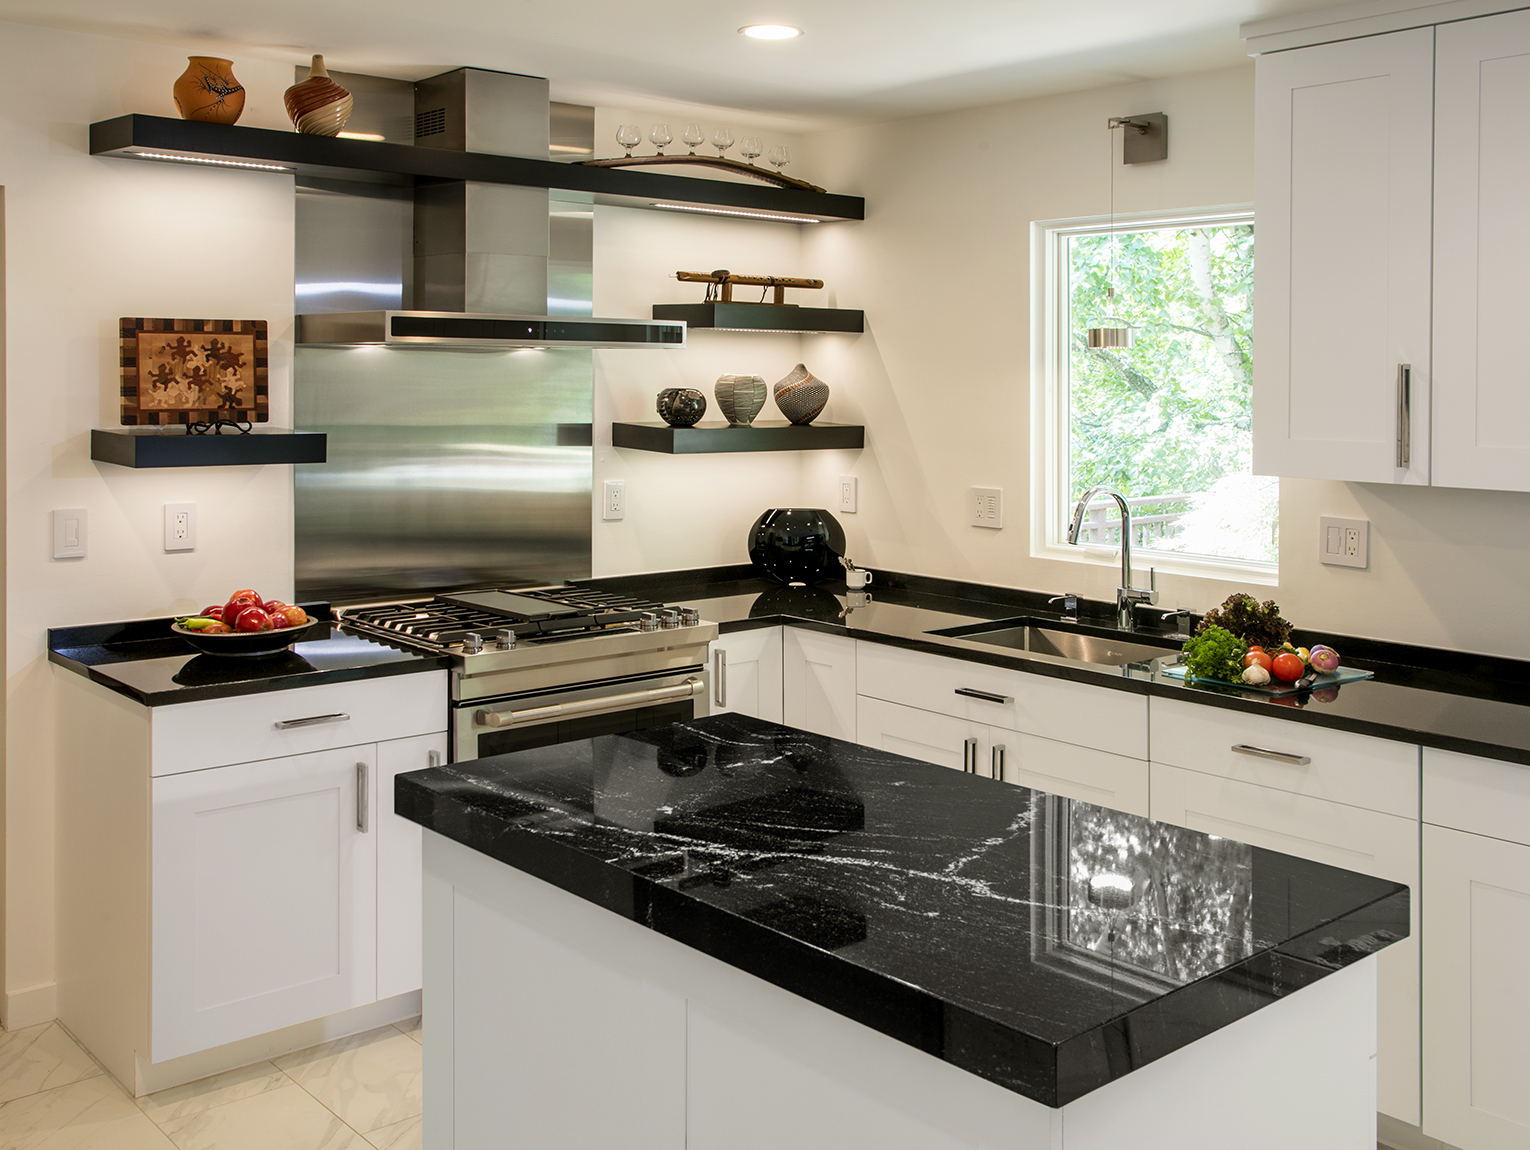 Contemporary Kitchen: black wooden shelving and black counters, white cabinetry